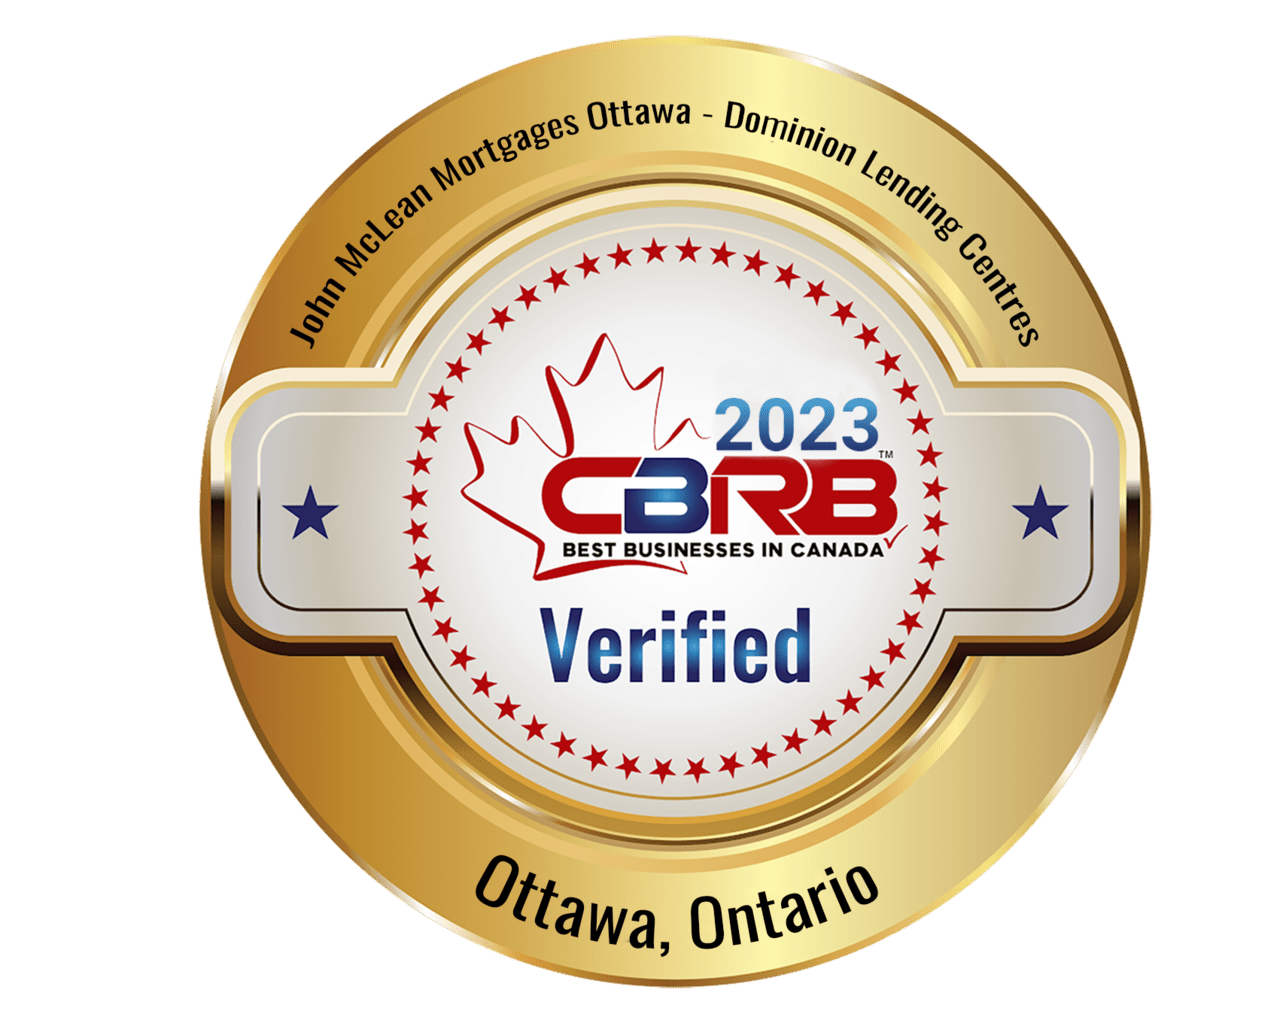 Logo for 2023 CBRB Best Businesses in Canada Verified for John McLean Mortgages Ottawa - Dominion Lending Centres.